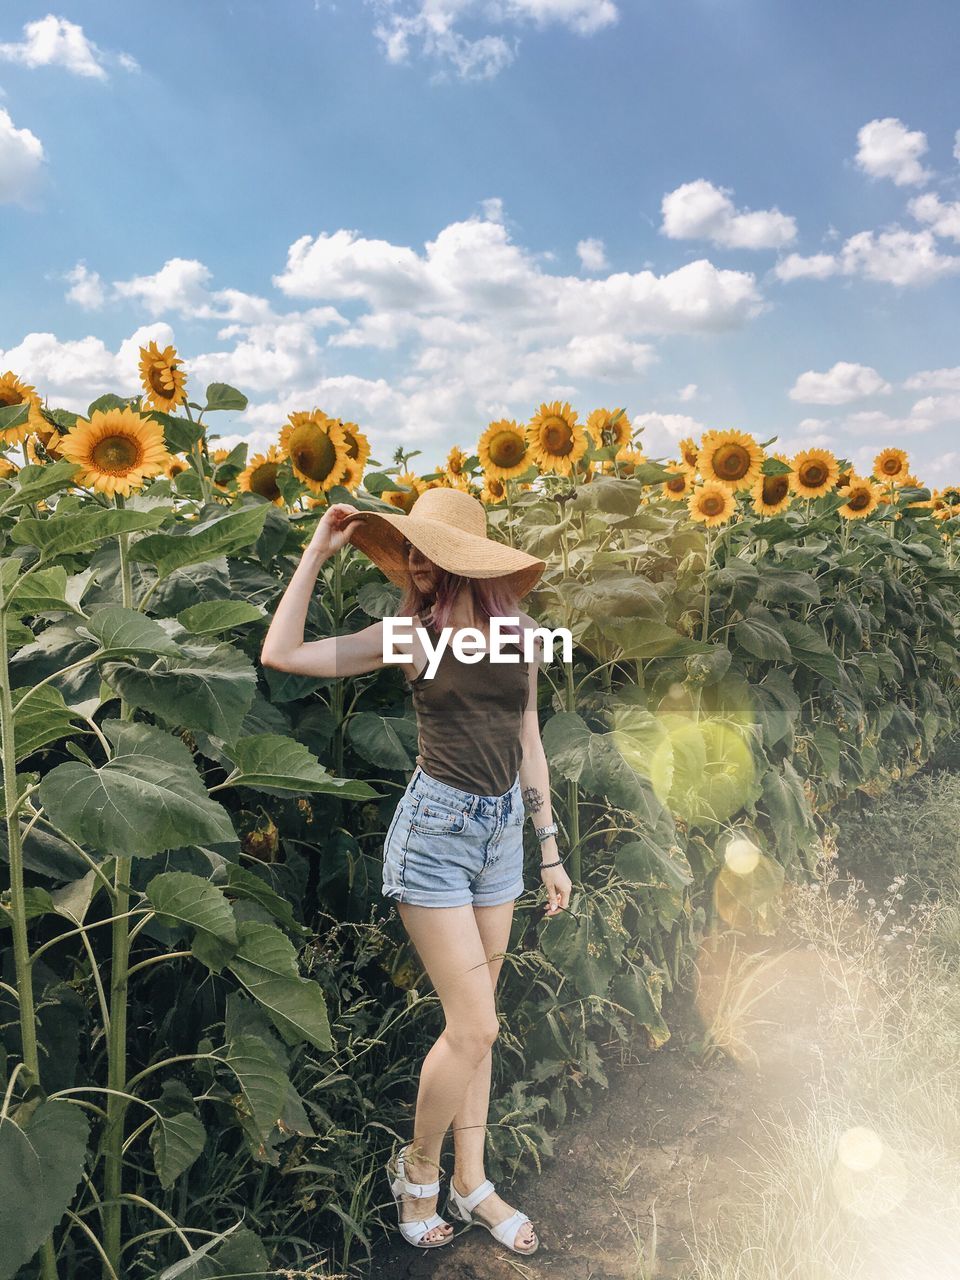 Woman standing by sunflowers on field